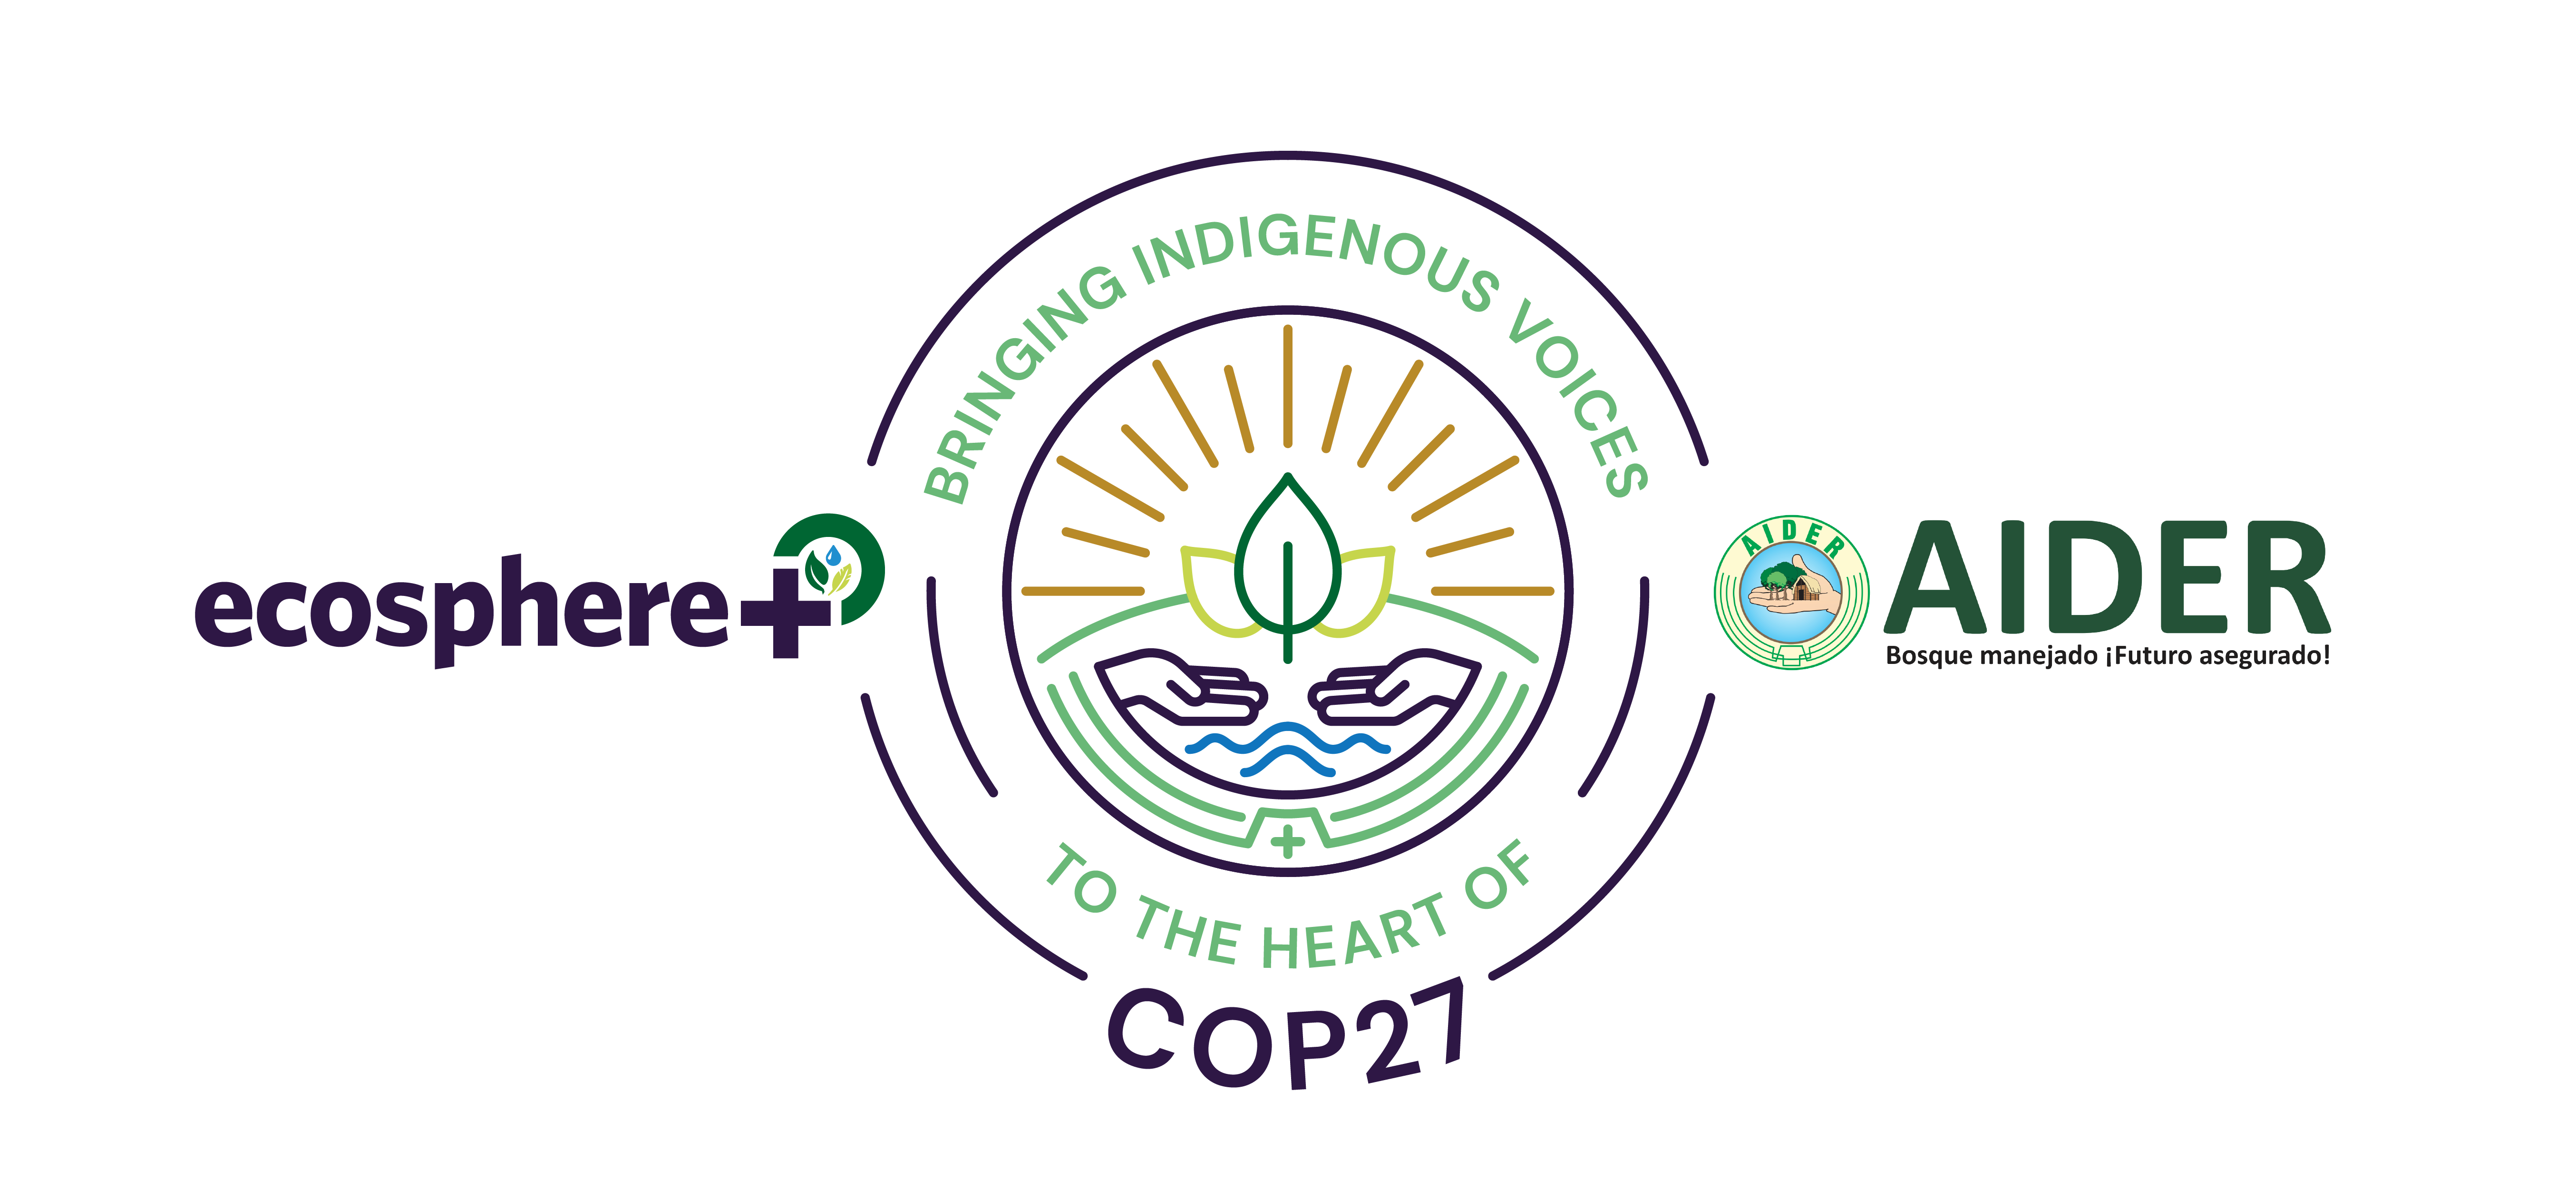 Ecosphere+ and AIDER partner to bring indigenous voices to the heart of COP27